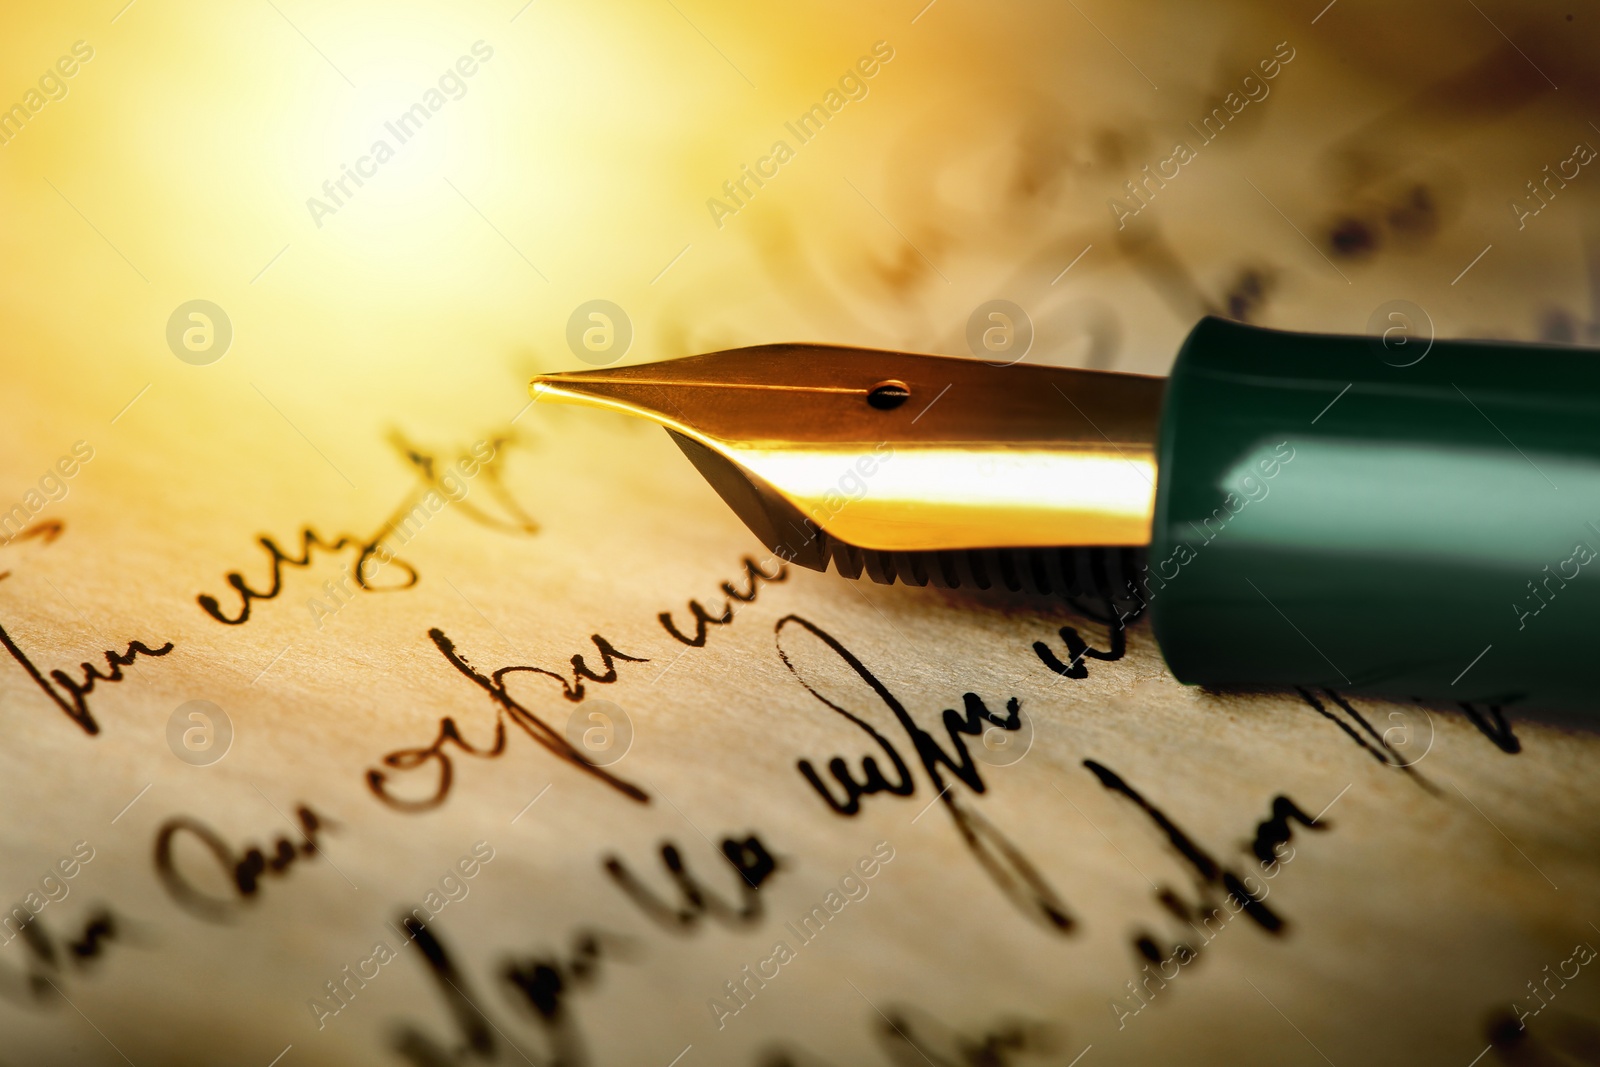 Image of Fountain pen on handwritten letter, closeup view